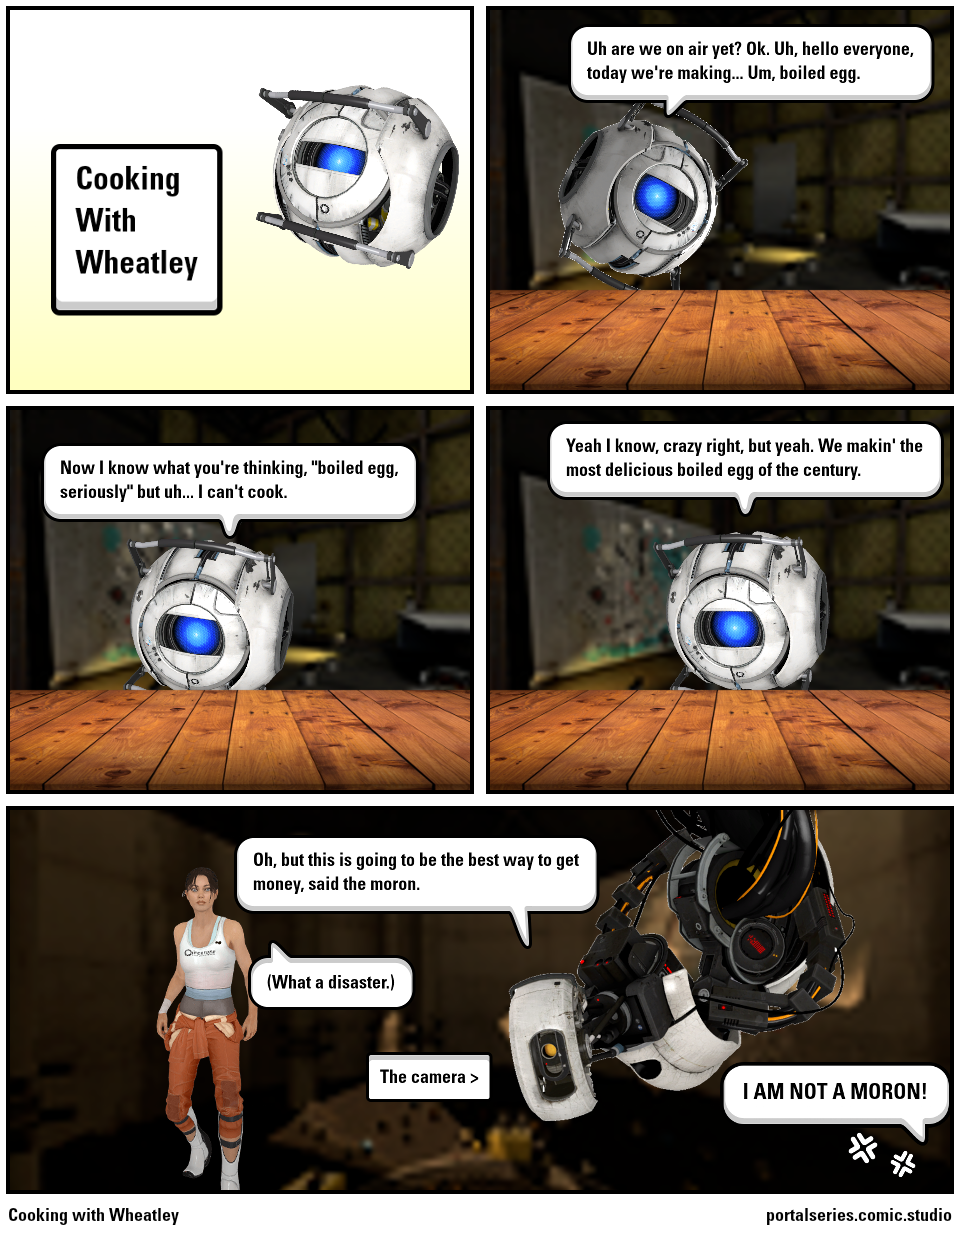 Cooking with Wheatley